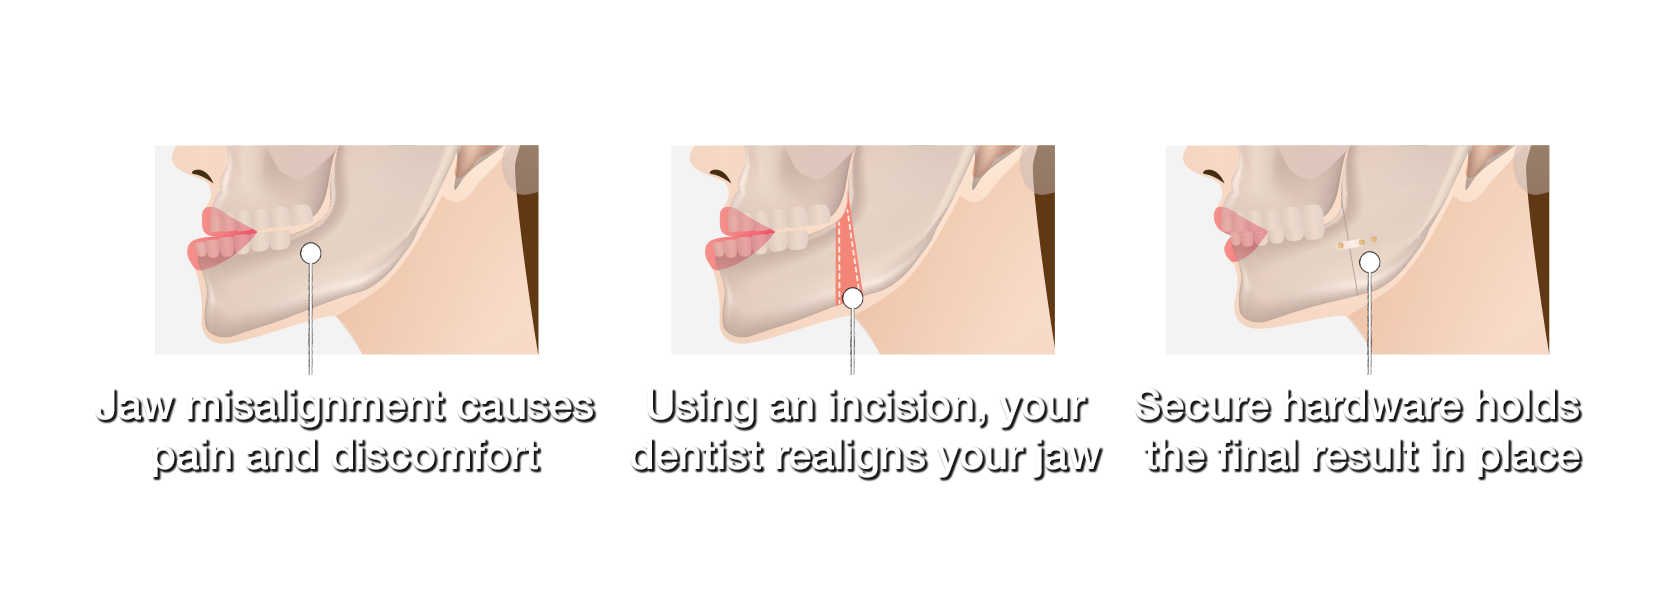 graphic with 3 images showing jaw misalignment, a surgical incision, and surgical hardware holding the jaw in place